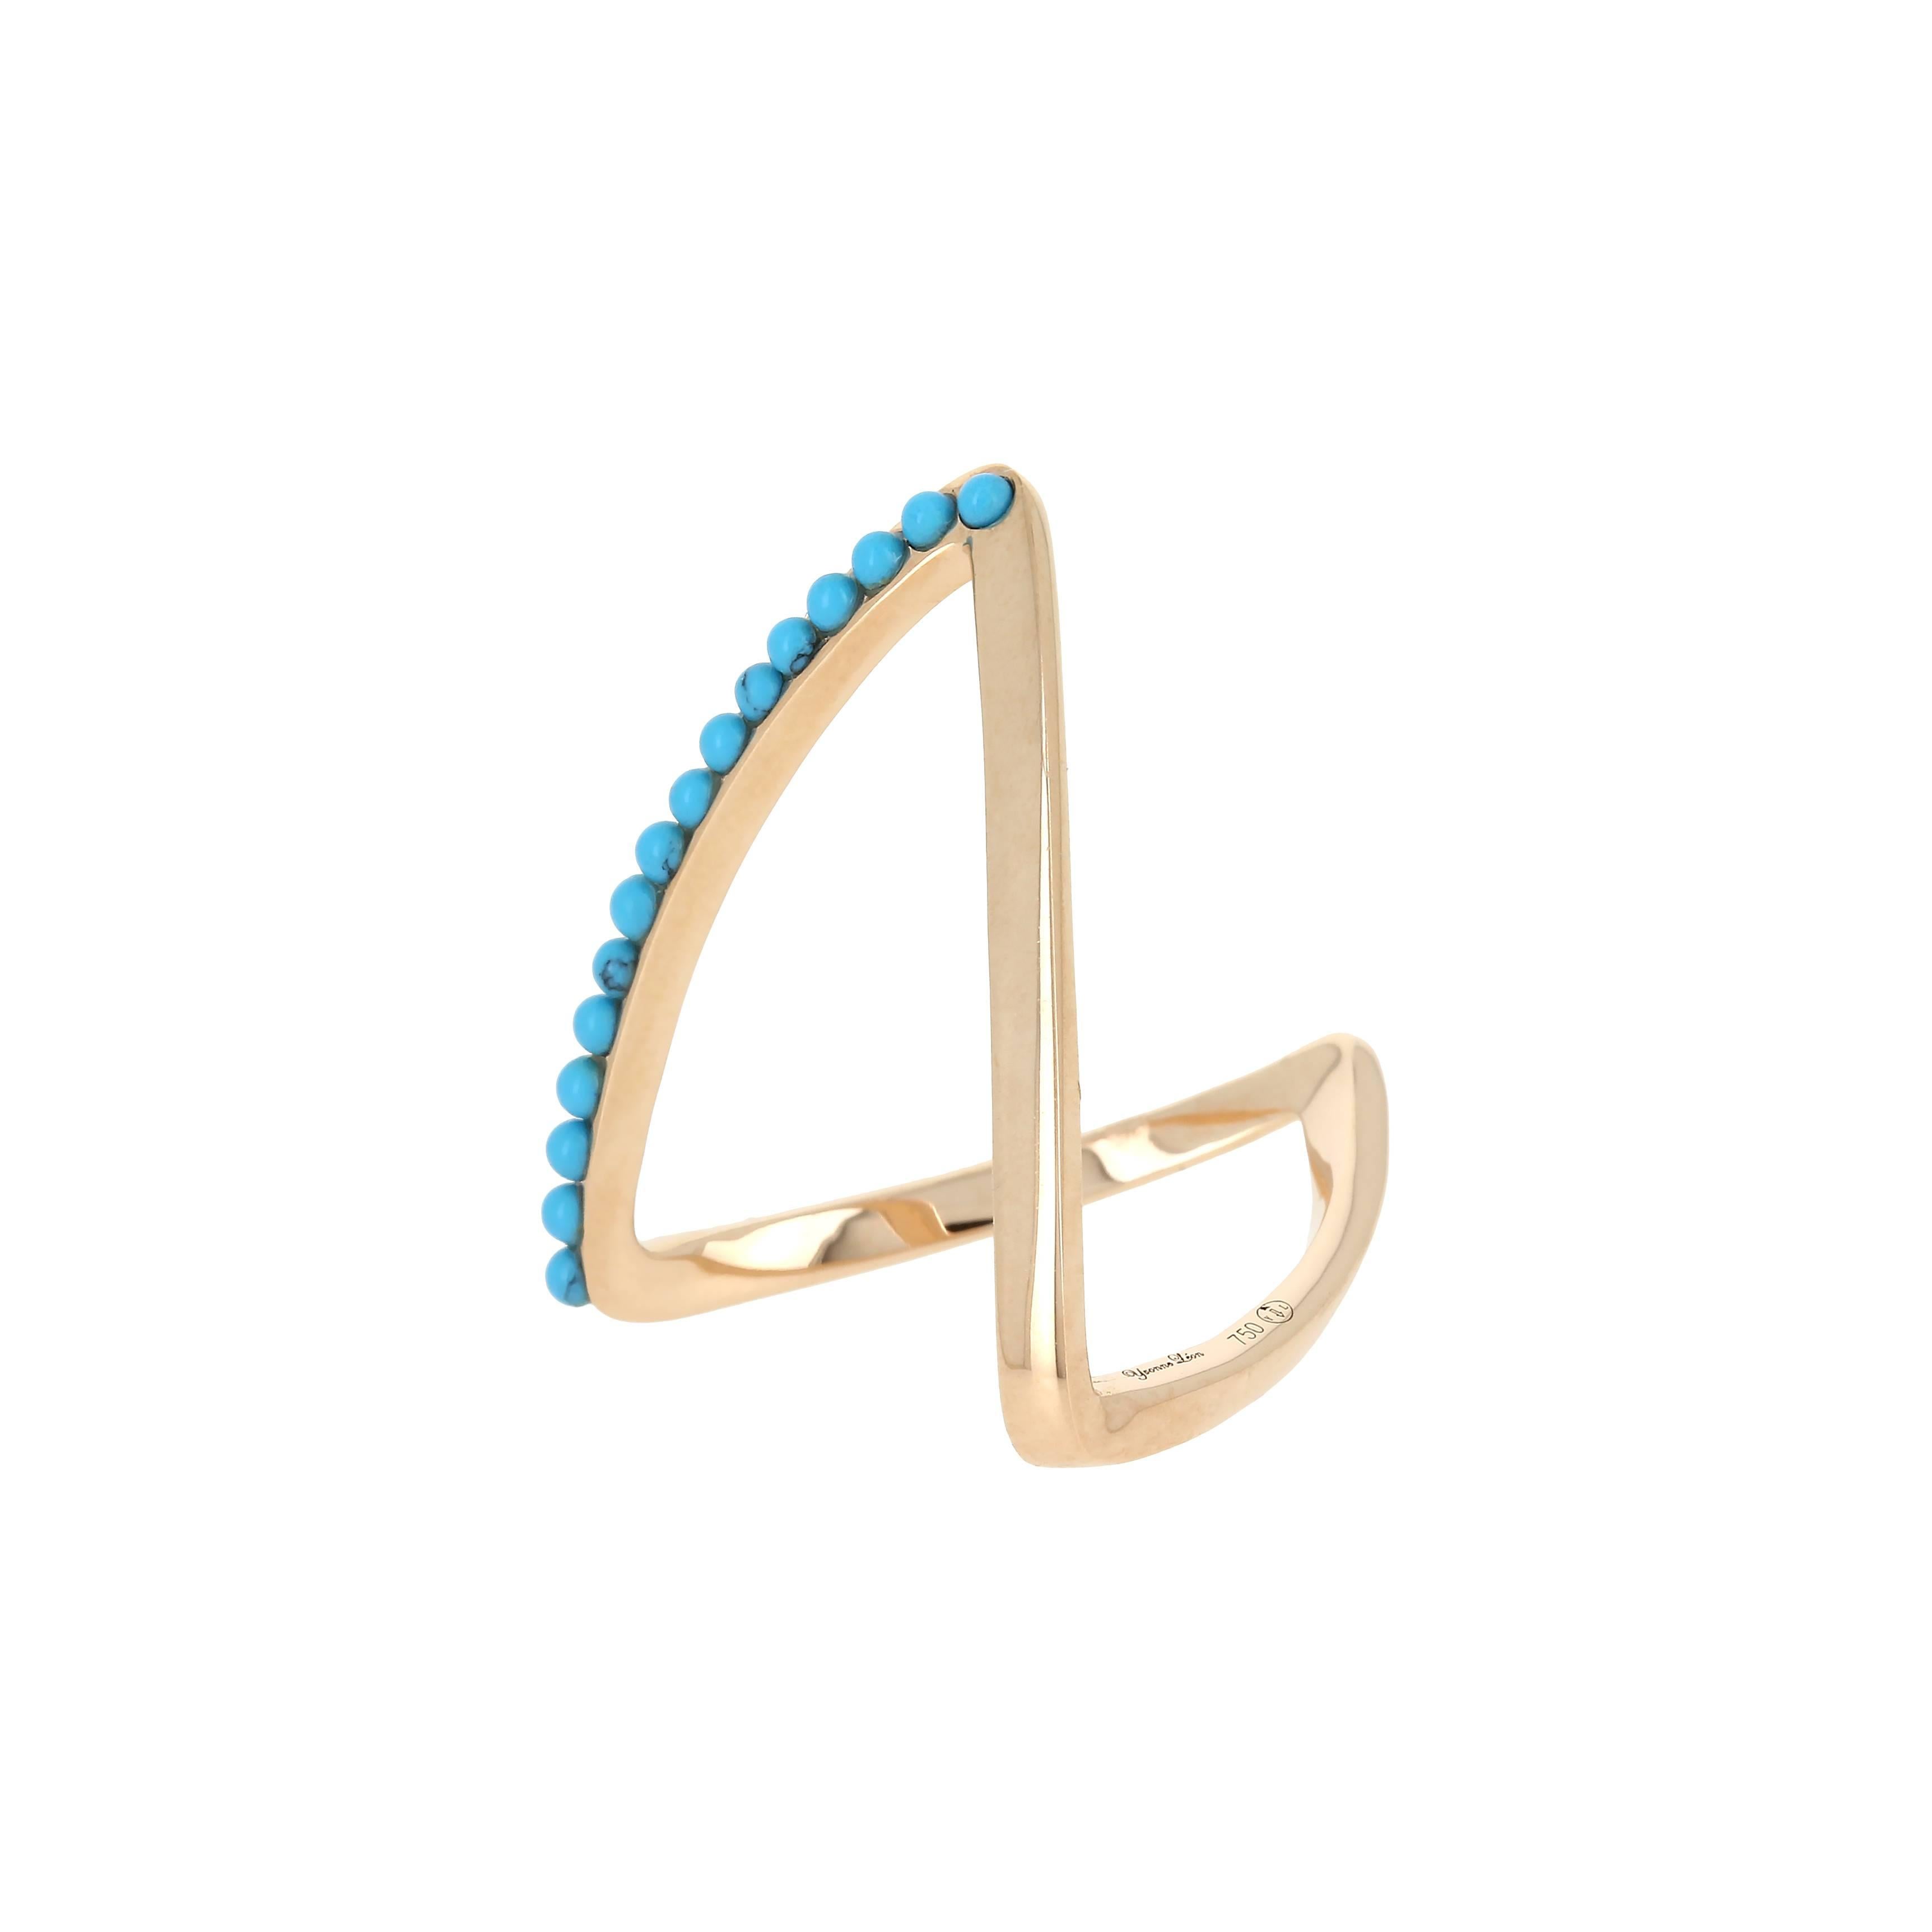 Ring in 18 carats Yellow Gold 3,6 gr approx.
Turquoise 0,35 carats Approx.
V Shape
Can be make at any size on demand.
